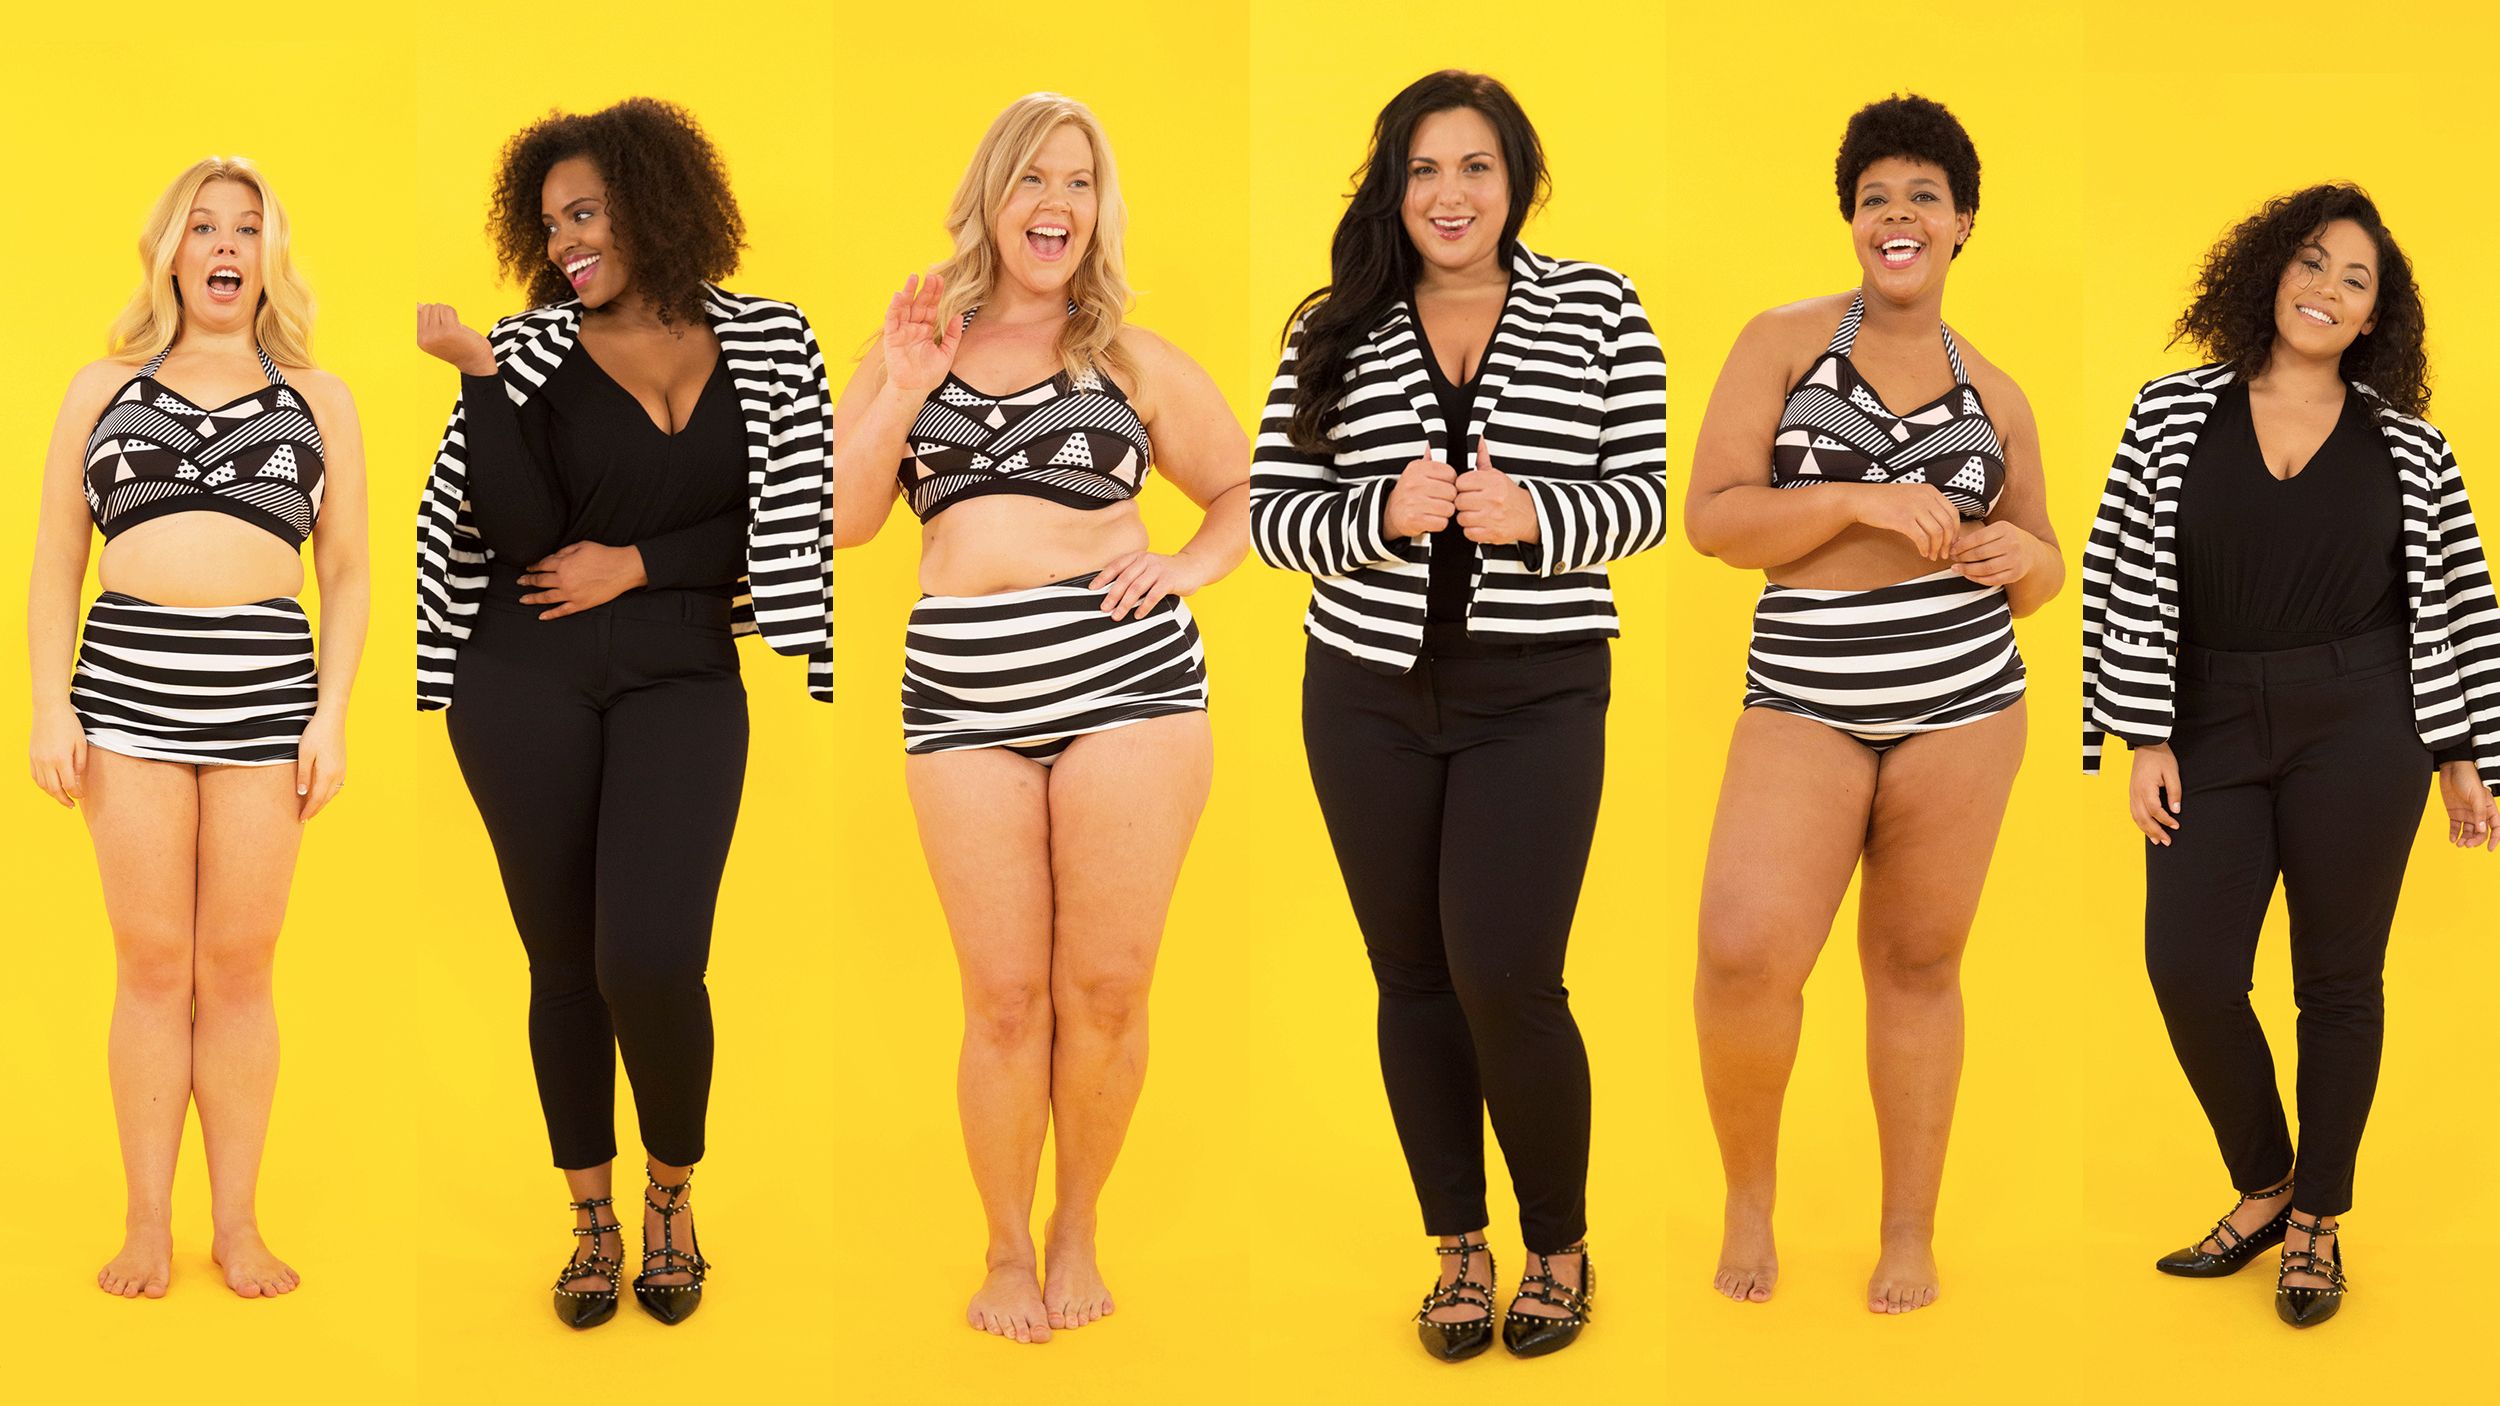 What is the difference between size 8 and size 16 in a woman's dress size?  - Quora